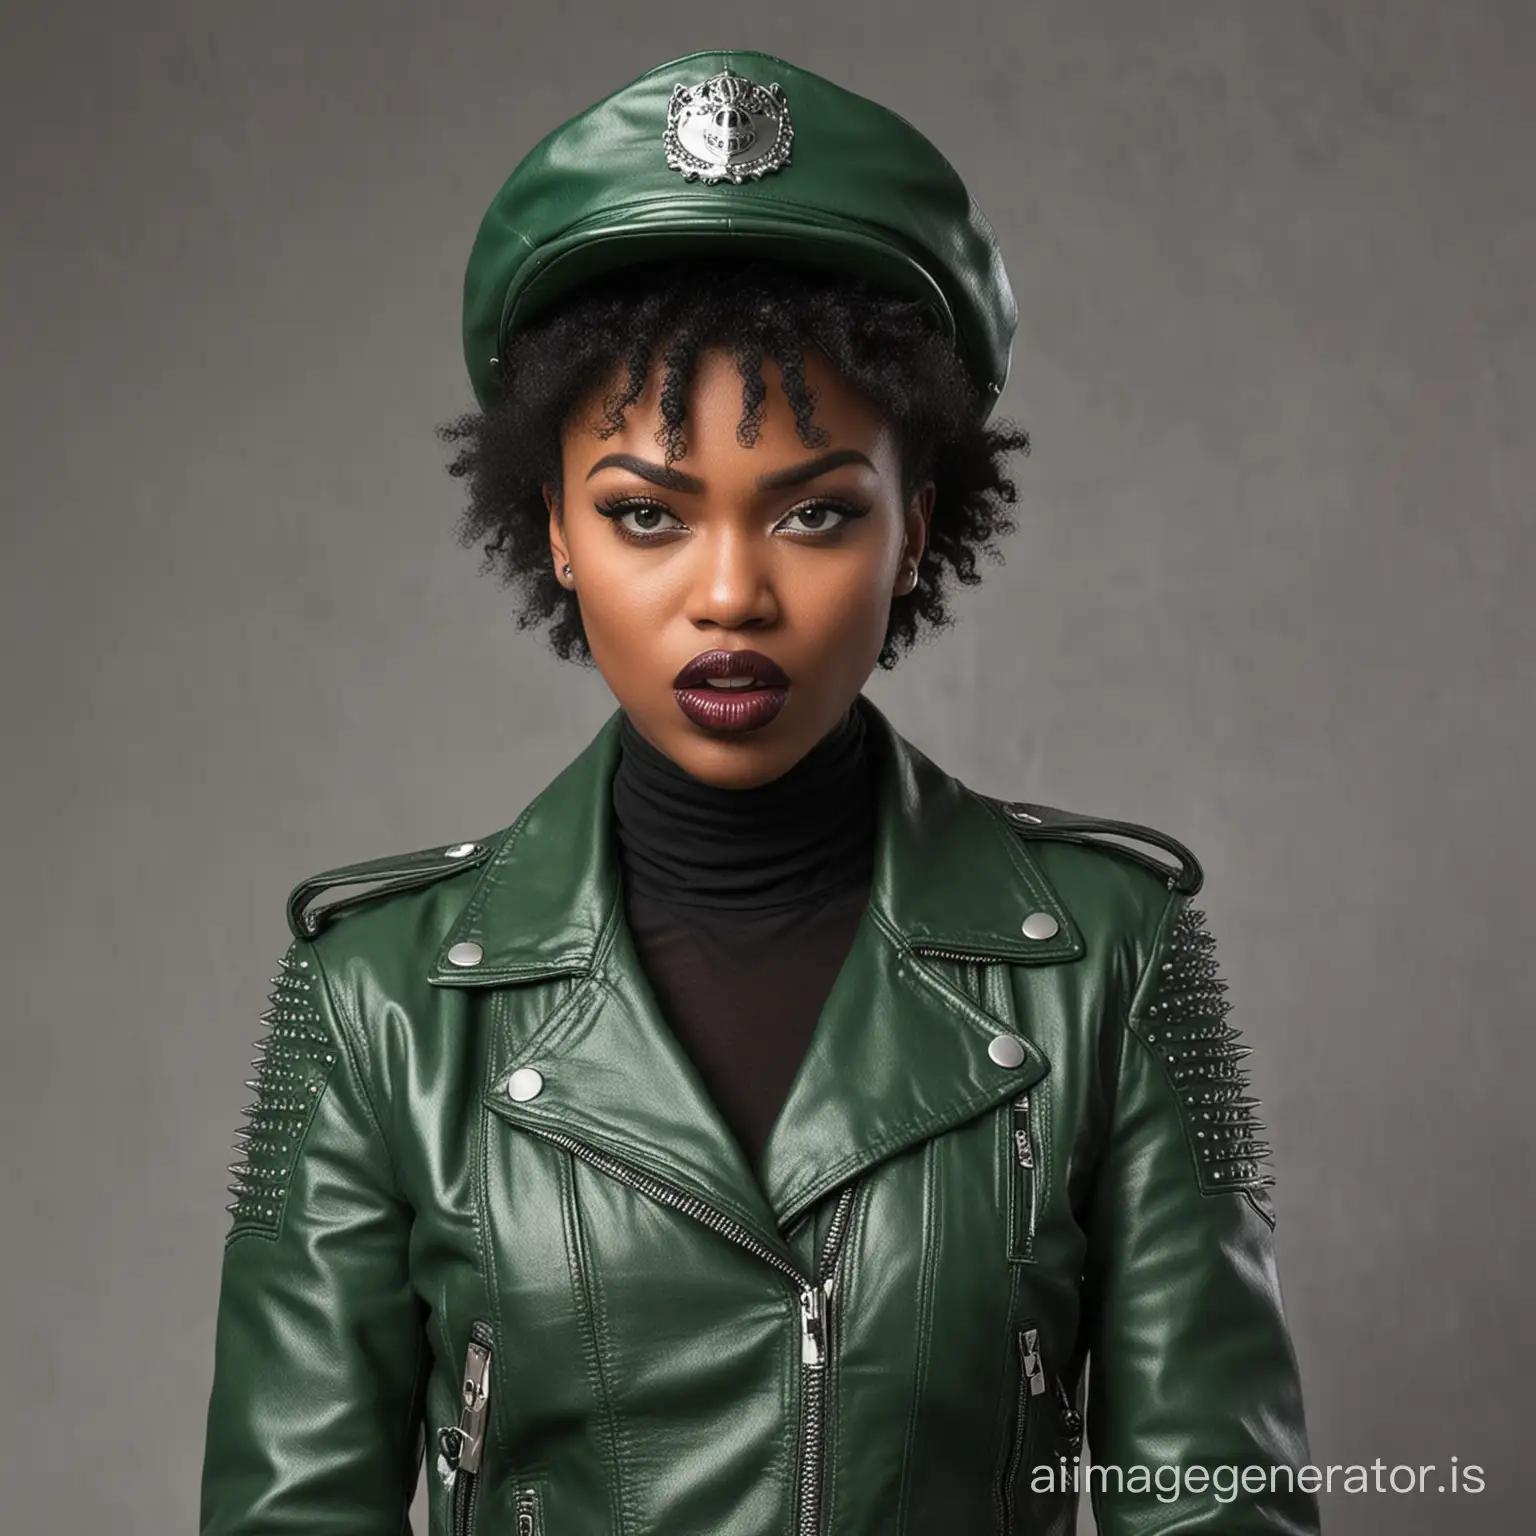 Angry-Punk-Black-Woman-in-Green-Leather-Gloves-and-Spiked-Jacket